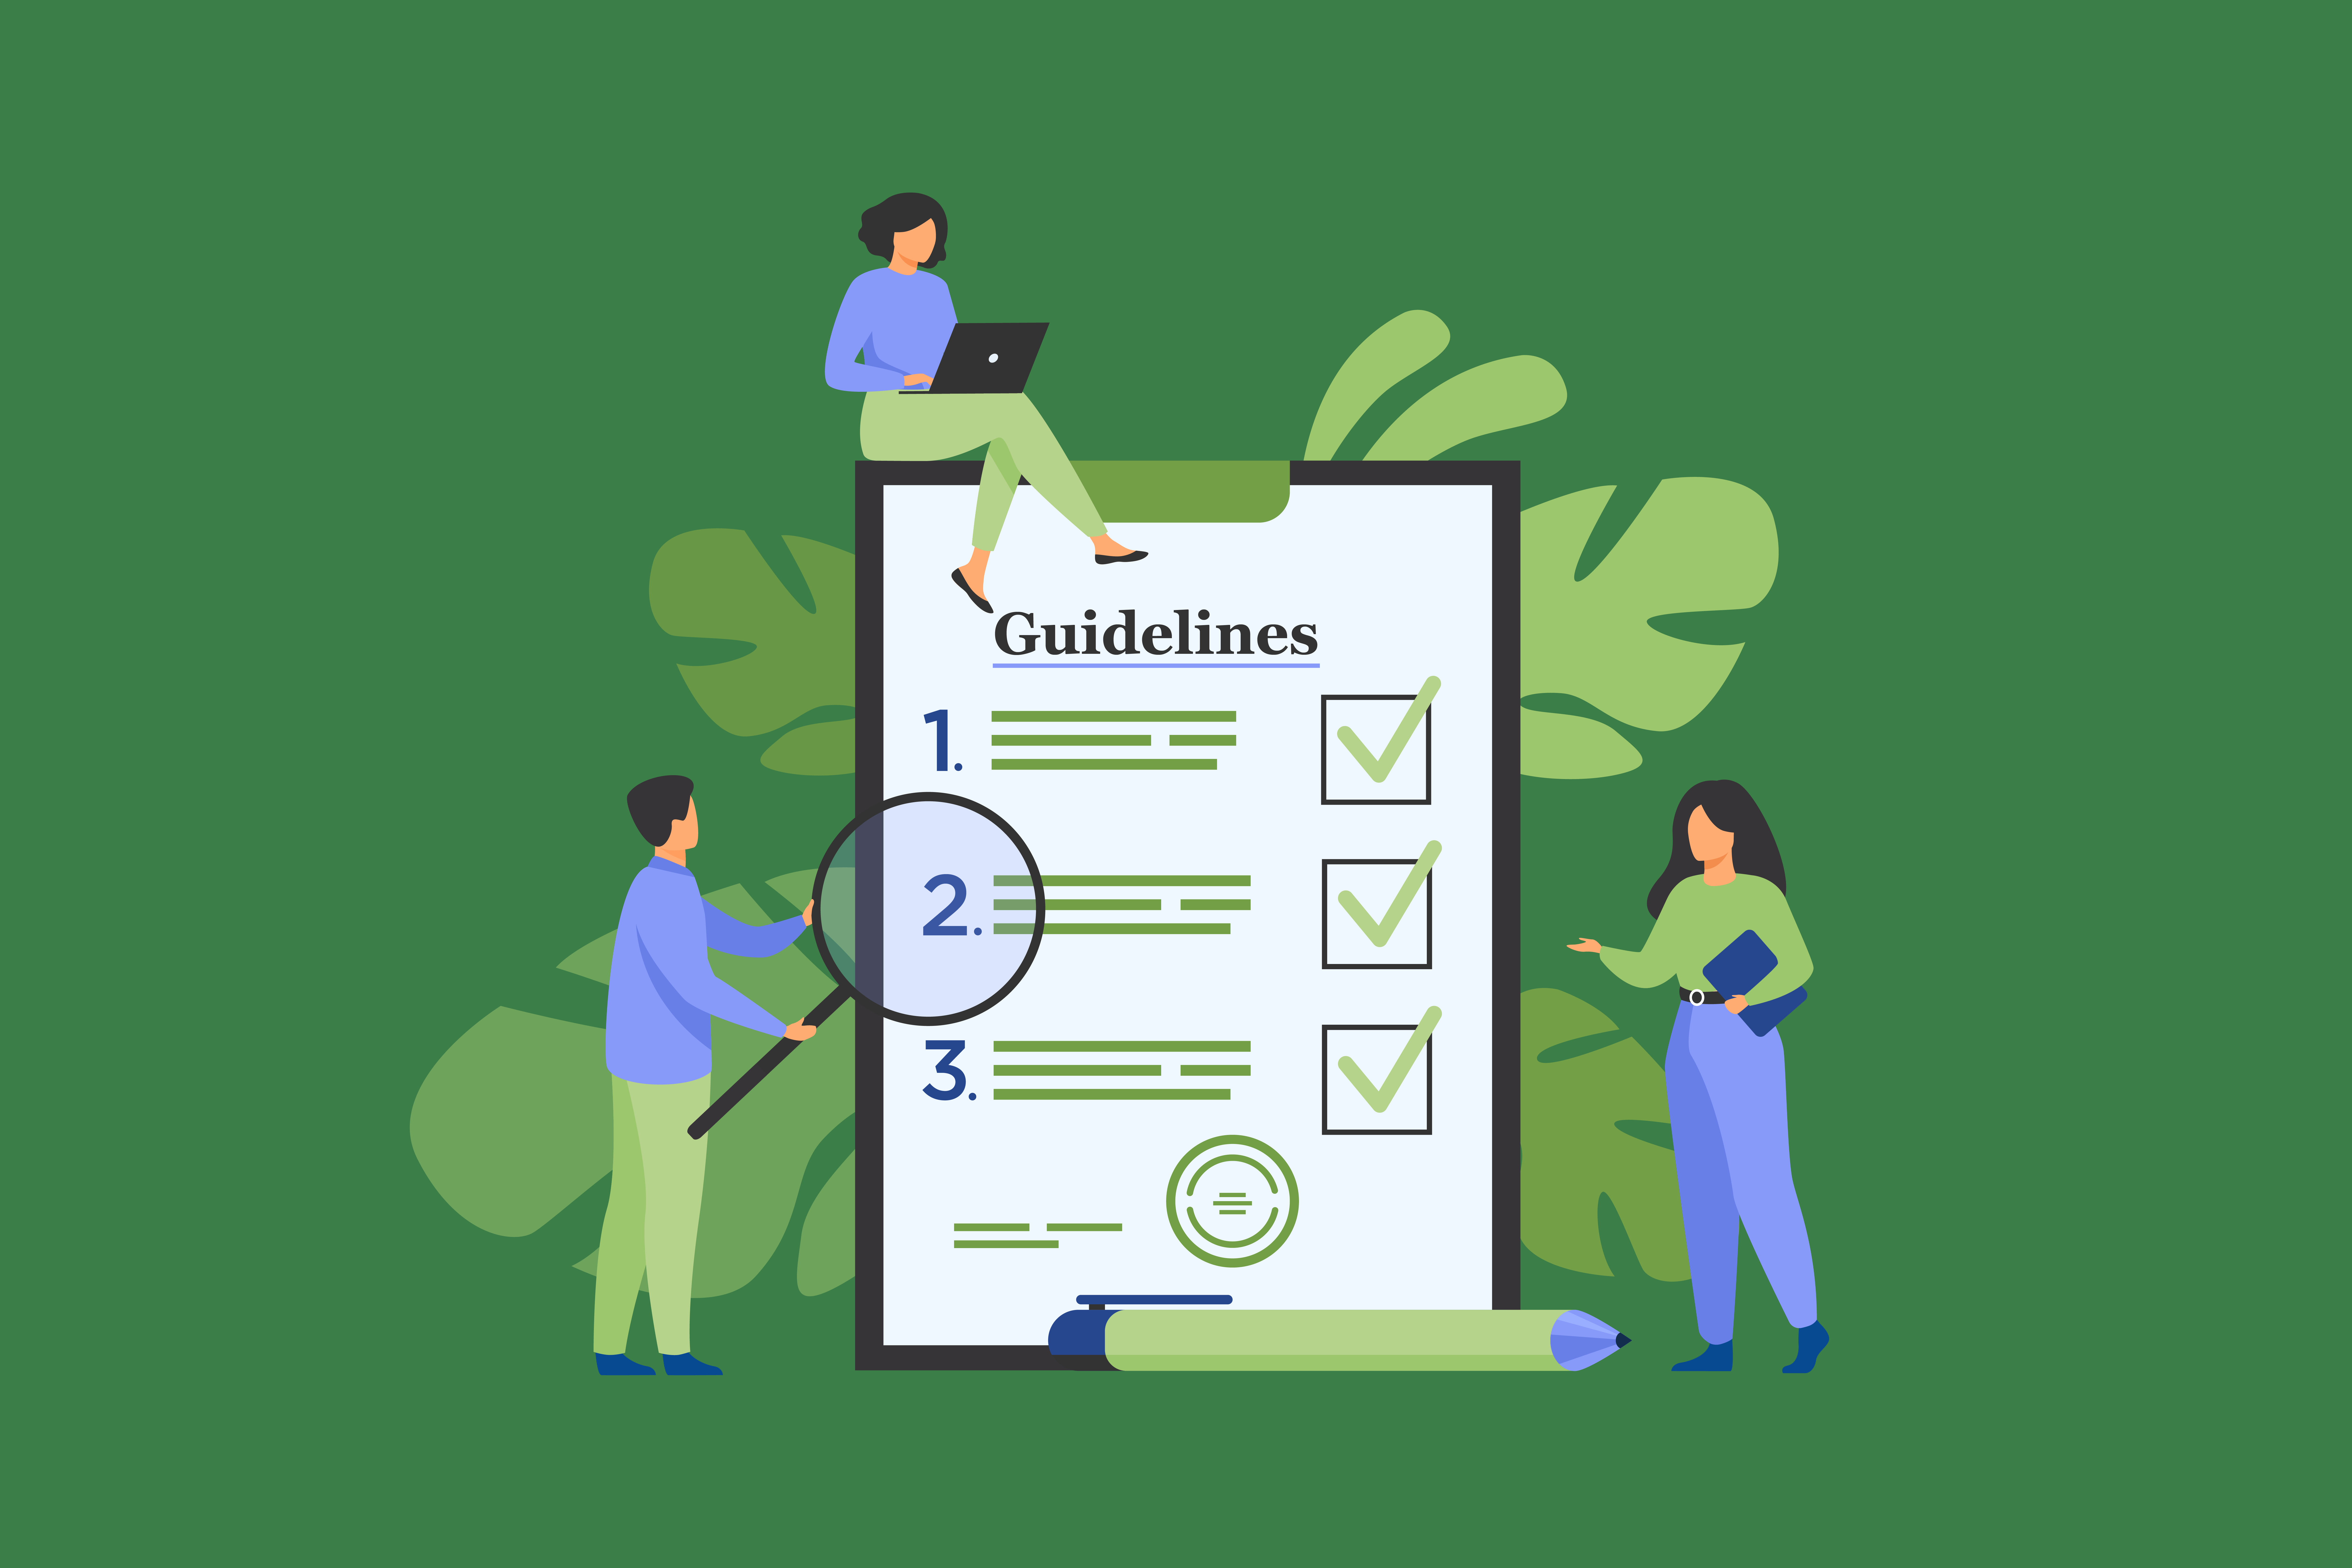 Three illustrated characters interacting with a large checklist titled "guidelines" on a blog, symbolizing teamwork and organization in project management or planning.